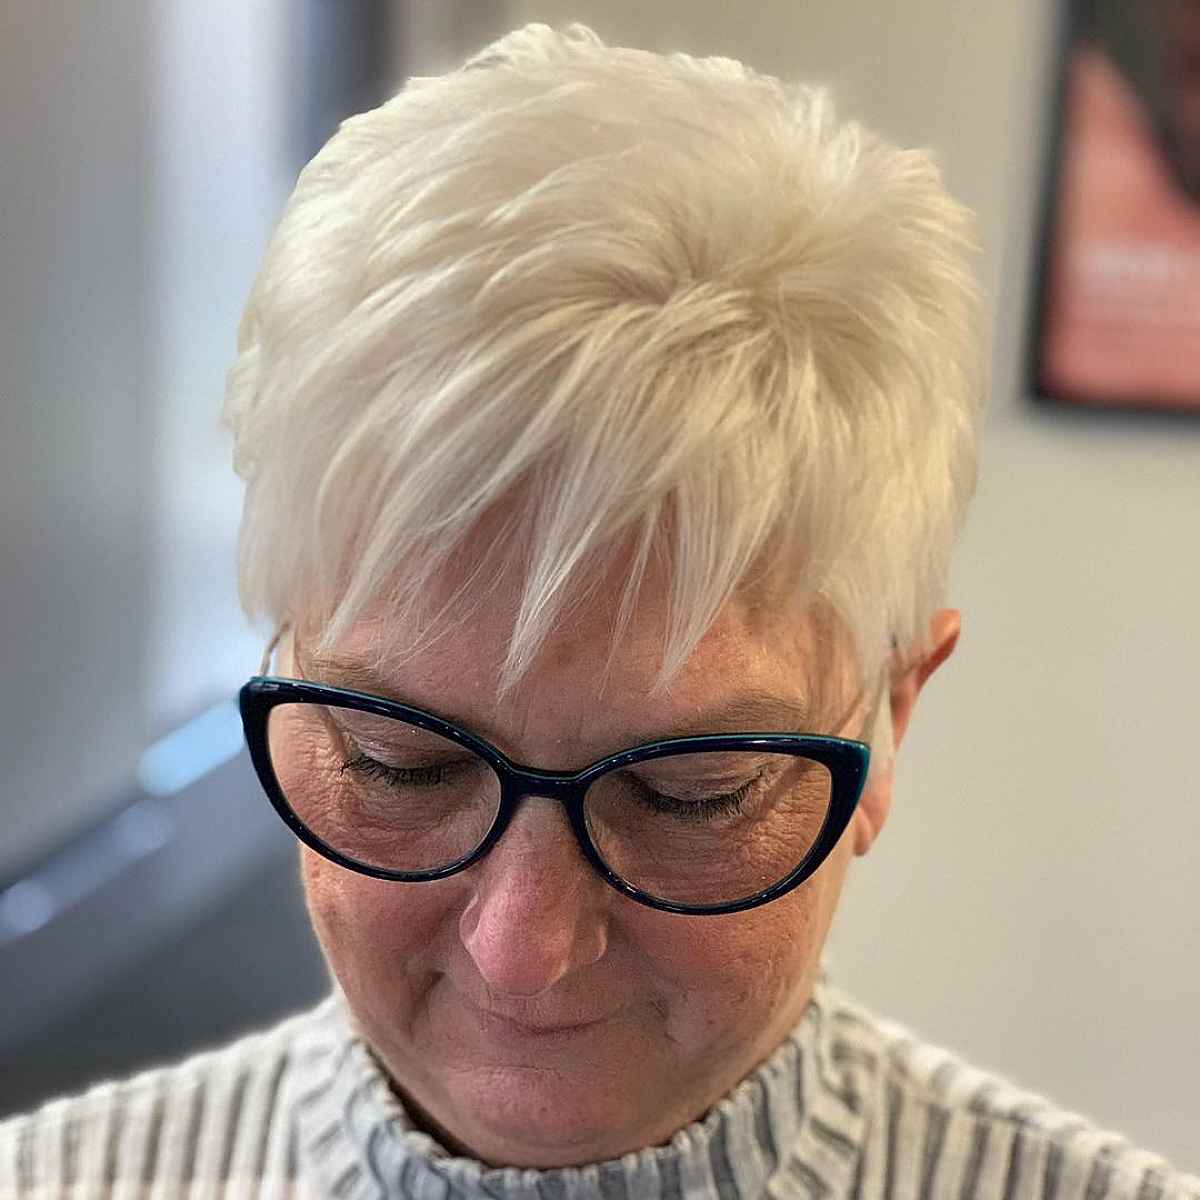 sassy pixie for thinning hair for ladies over 60